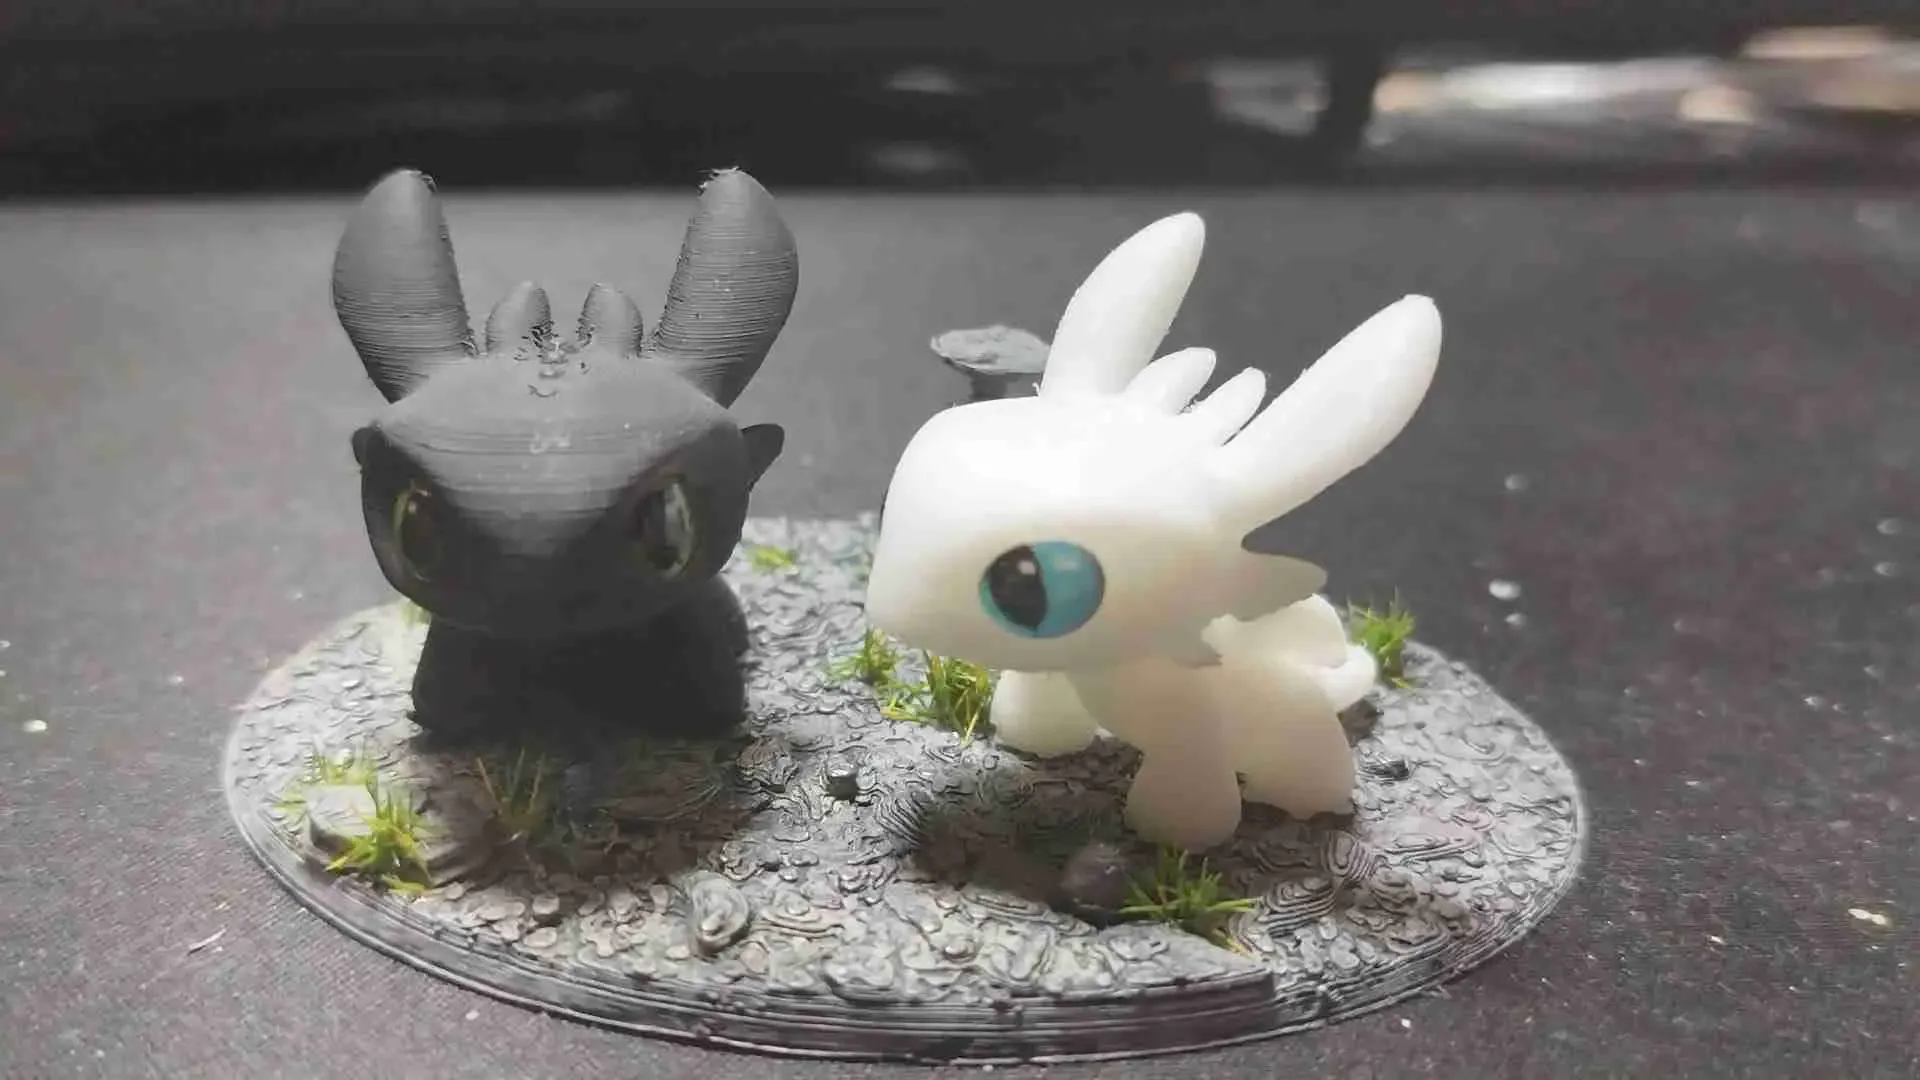 How to Train your Dragon Diorama - Toothless, Desdentao